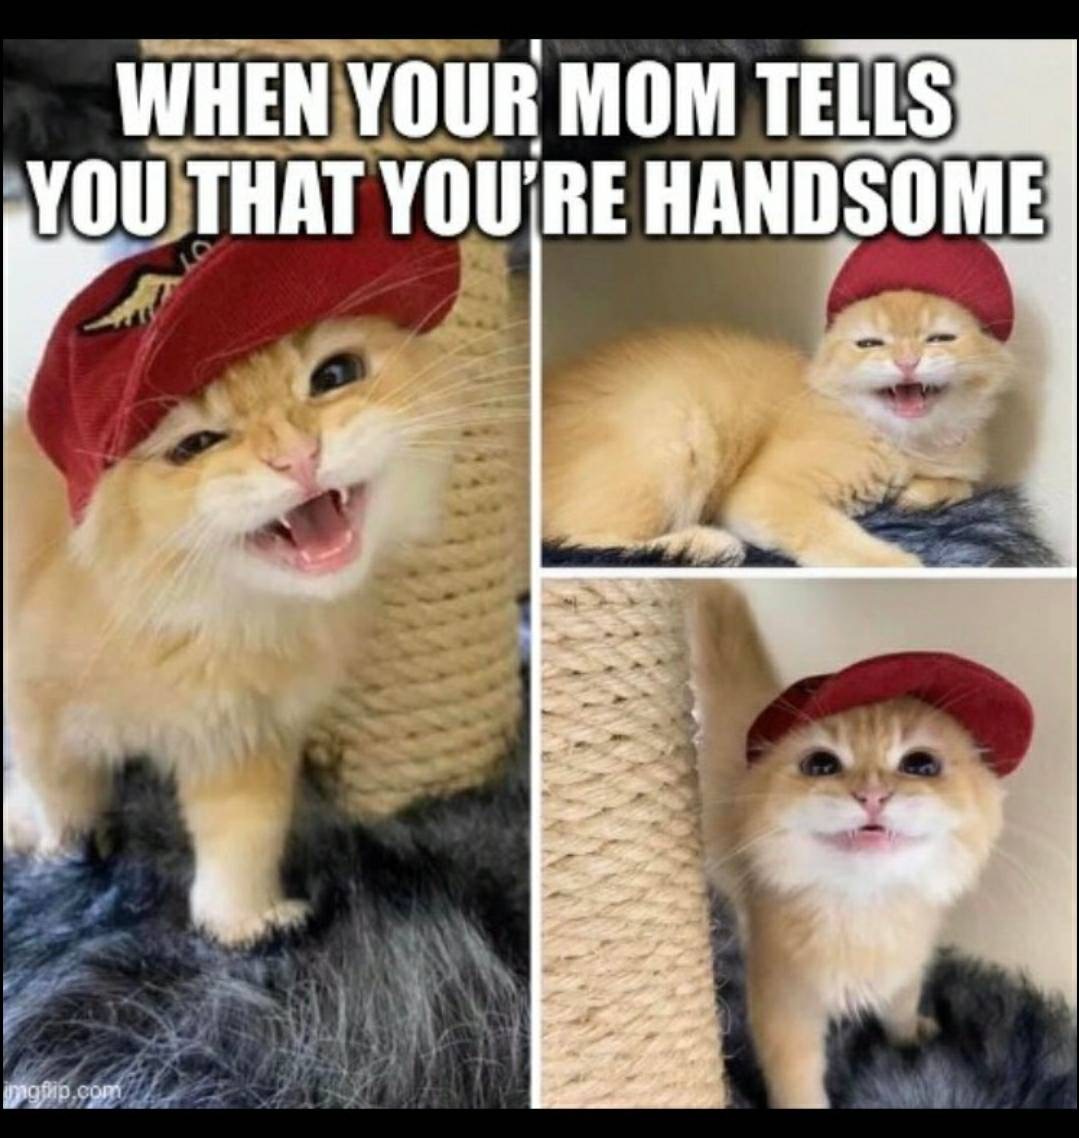 funny memes - When Your Mom Tells You That You'Re Handsome imgflip.com